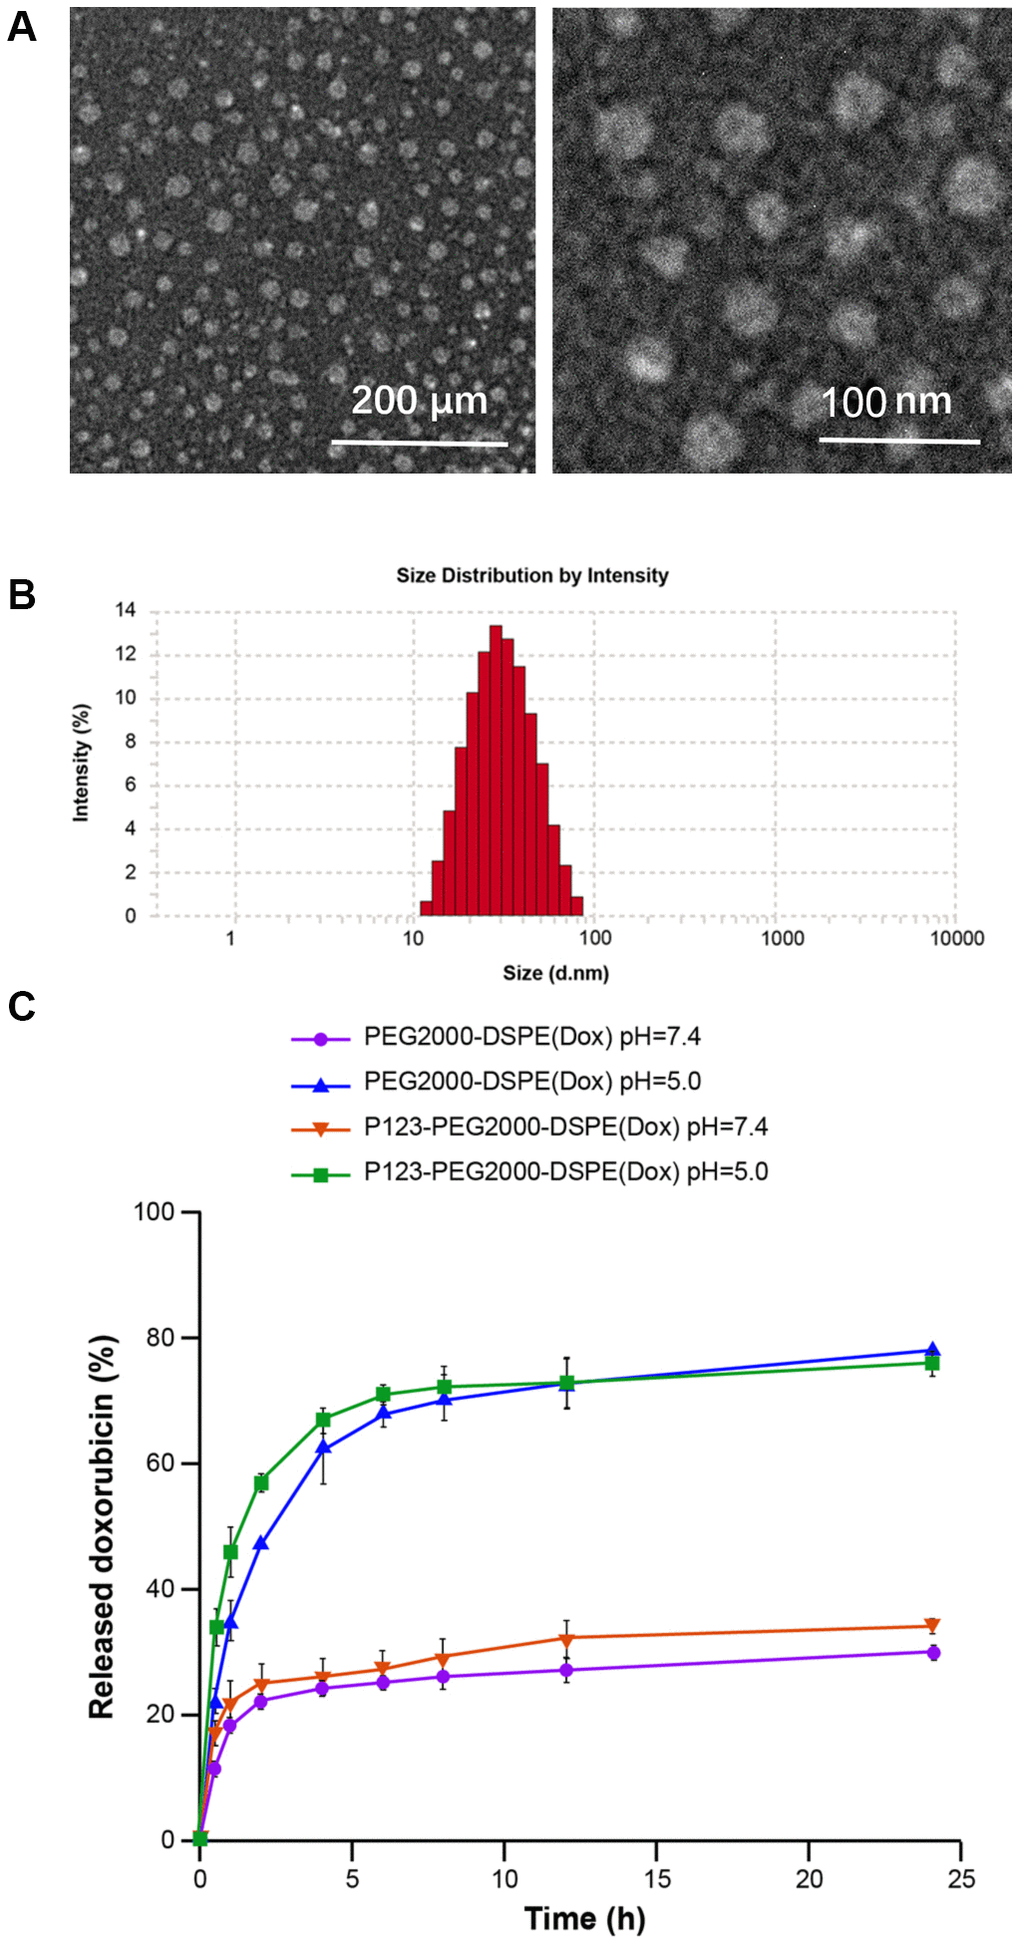 Characterization of P123-PEG2000-DSPE (Dox). (A) The morphological characteristics of P123-PEG2000-DSPE (Dox) observed by transmission electron microscope. (B) Size distributions of P123-PEG2000-DSPE (Dox) determined by dynamic light scattering. (C) Cumulative drug release profiling of PEG2000-DSPE (Dox) and P123-PEG2000-DSPE (Dox) in phosphate-buffer saline (PBS, pH 7.4 and pH 5.0).